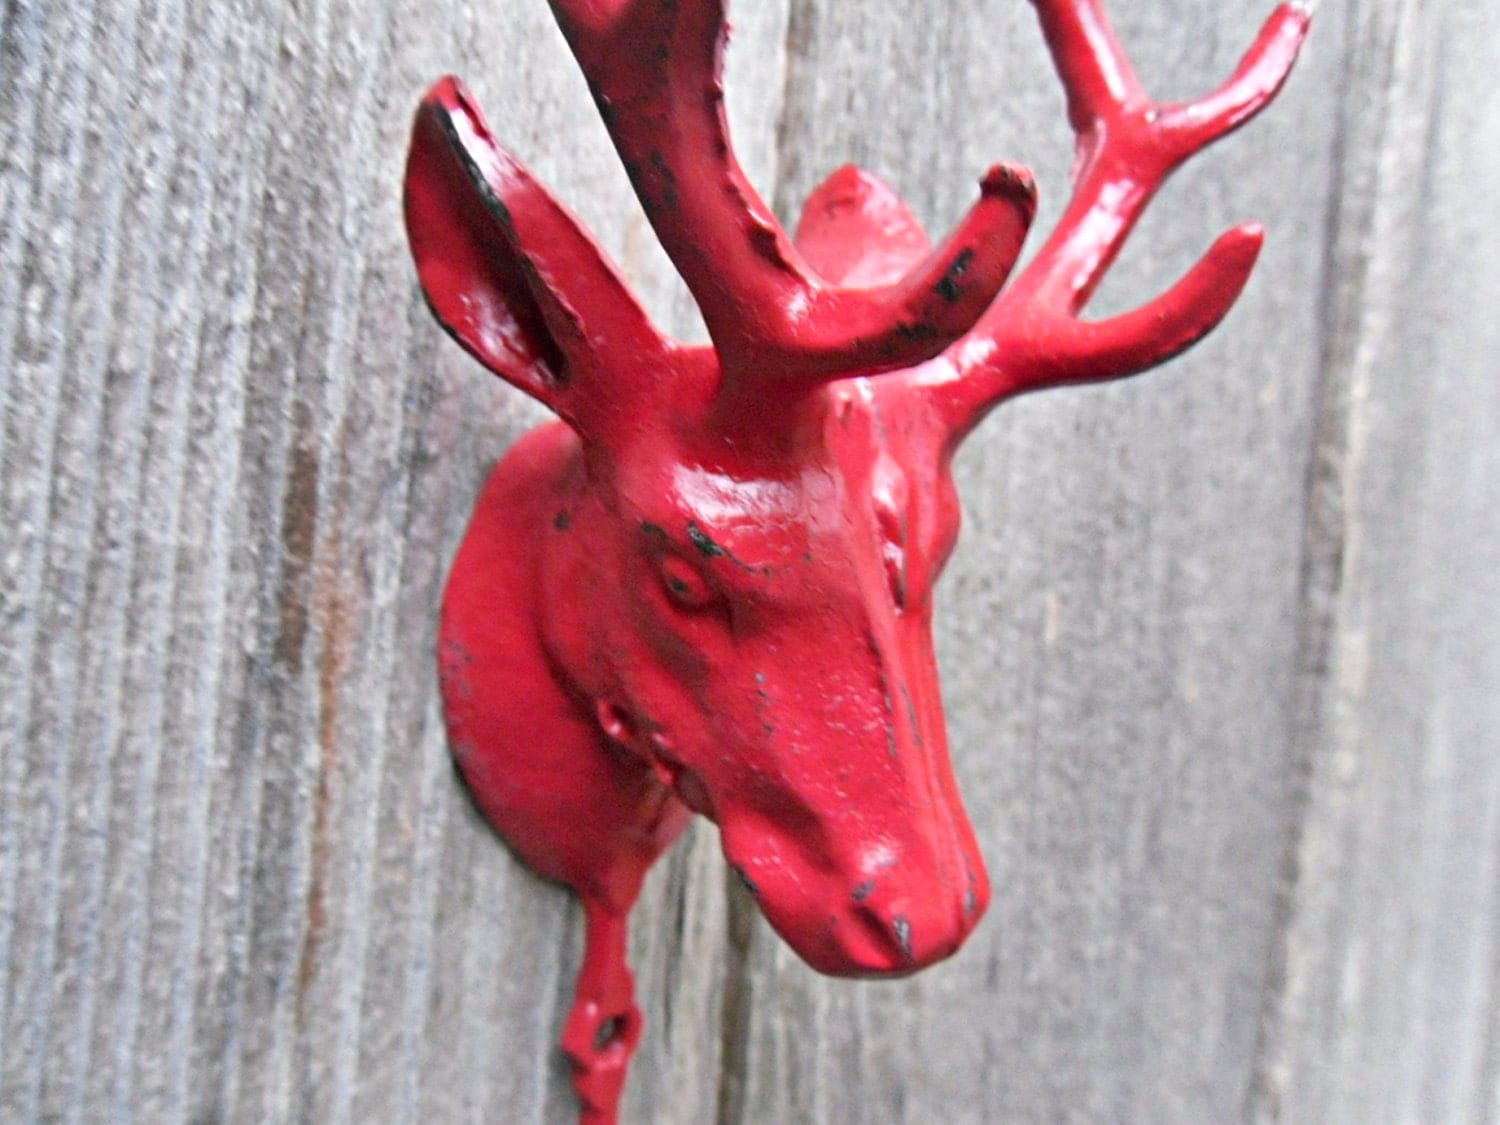 Deer Hook / Wall Decor / Antlers / Red Wall by Theshabbyshak